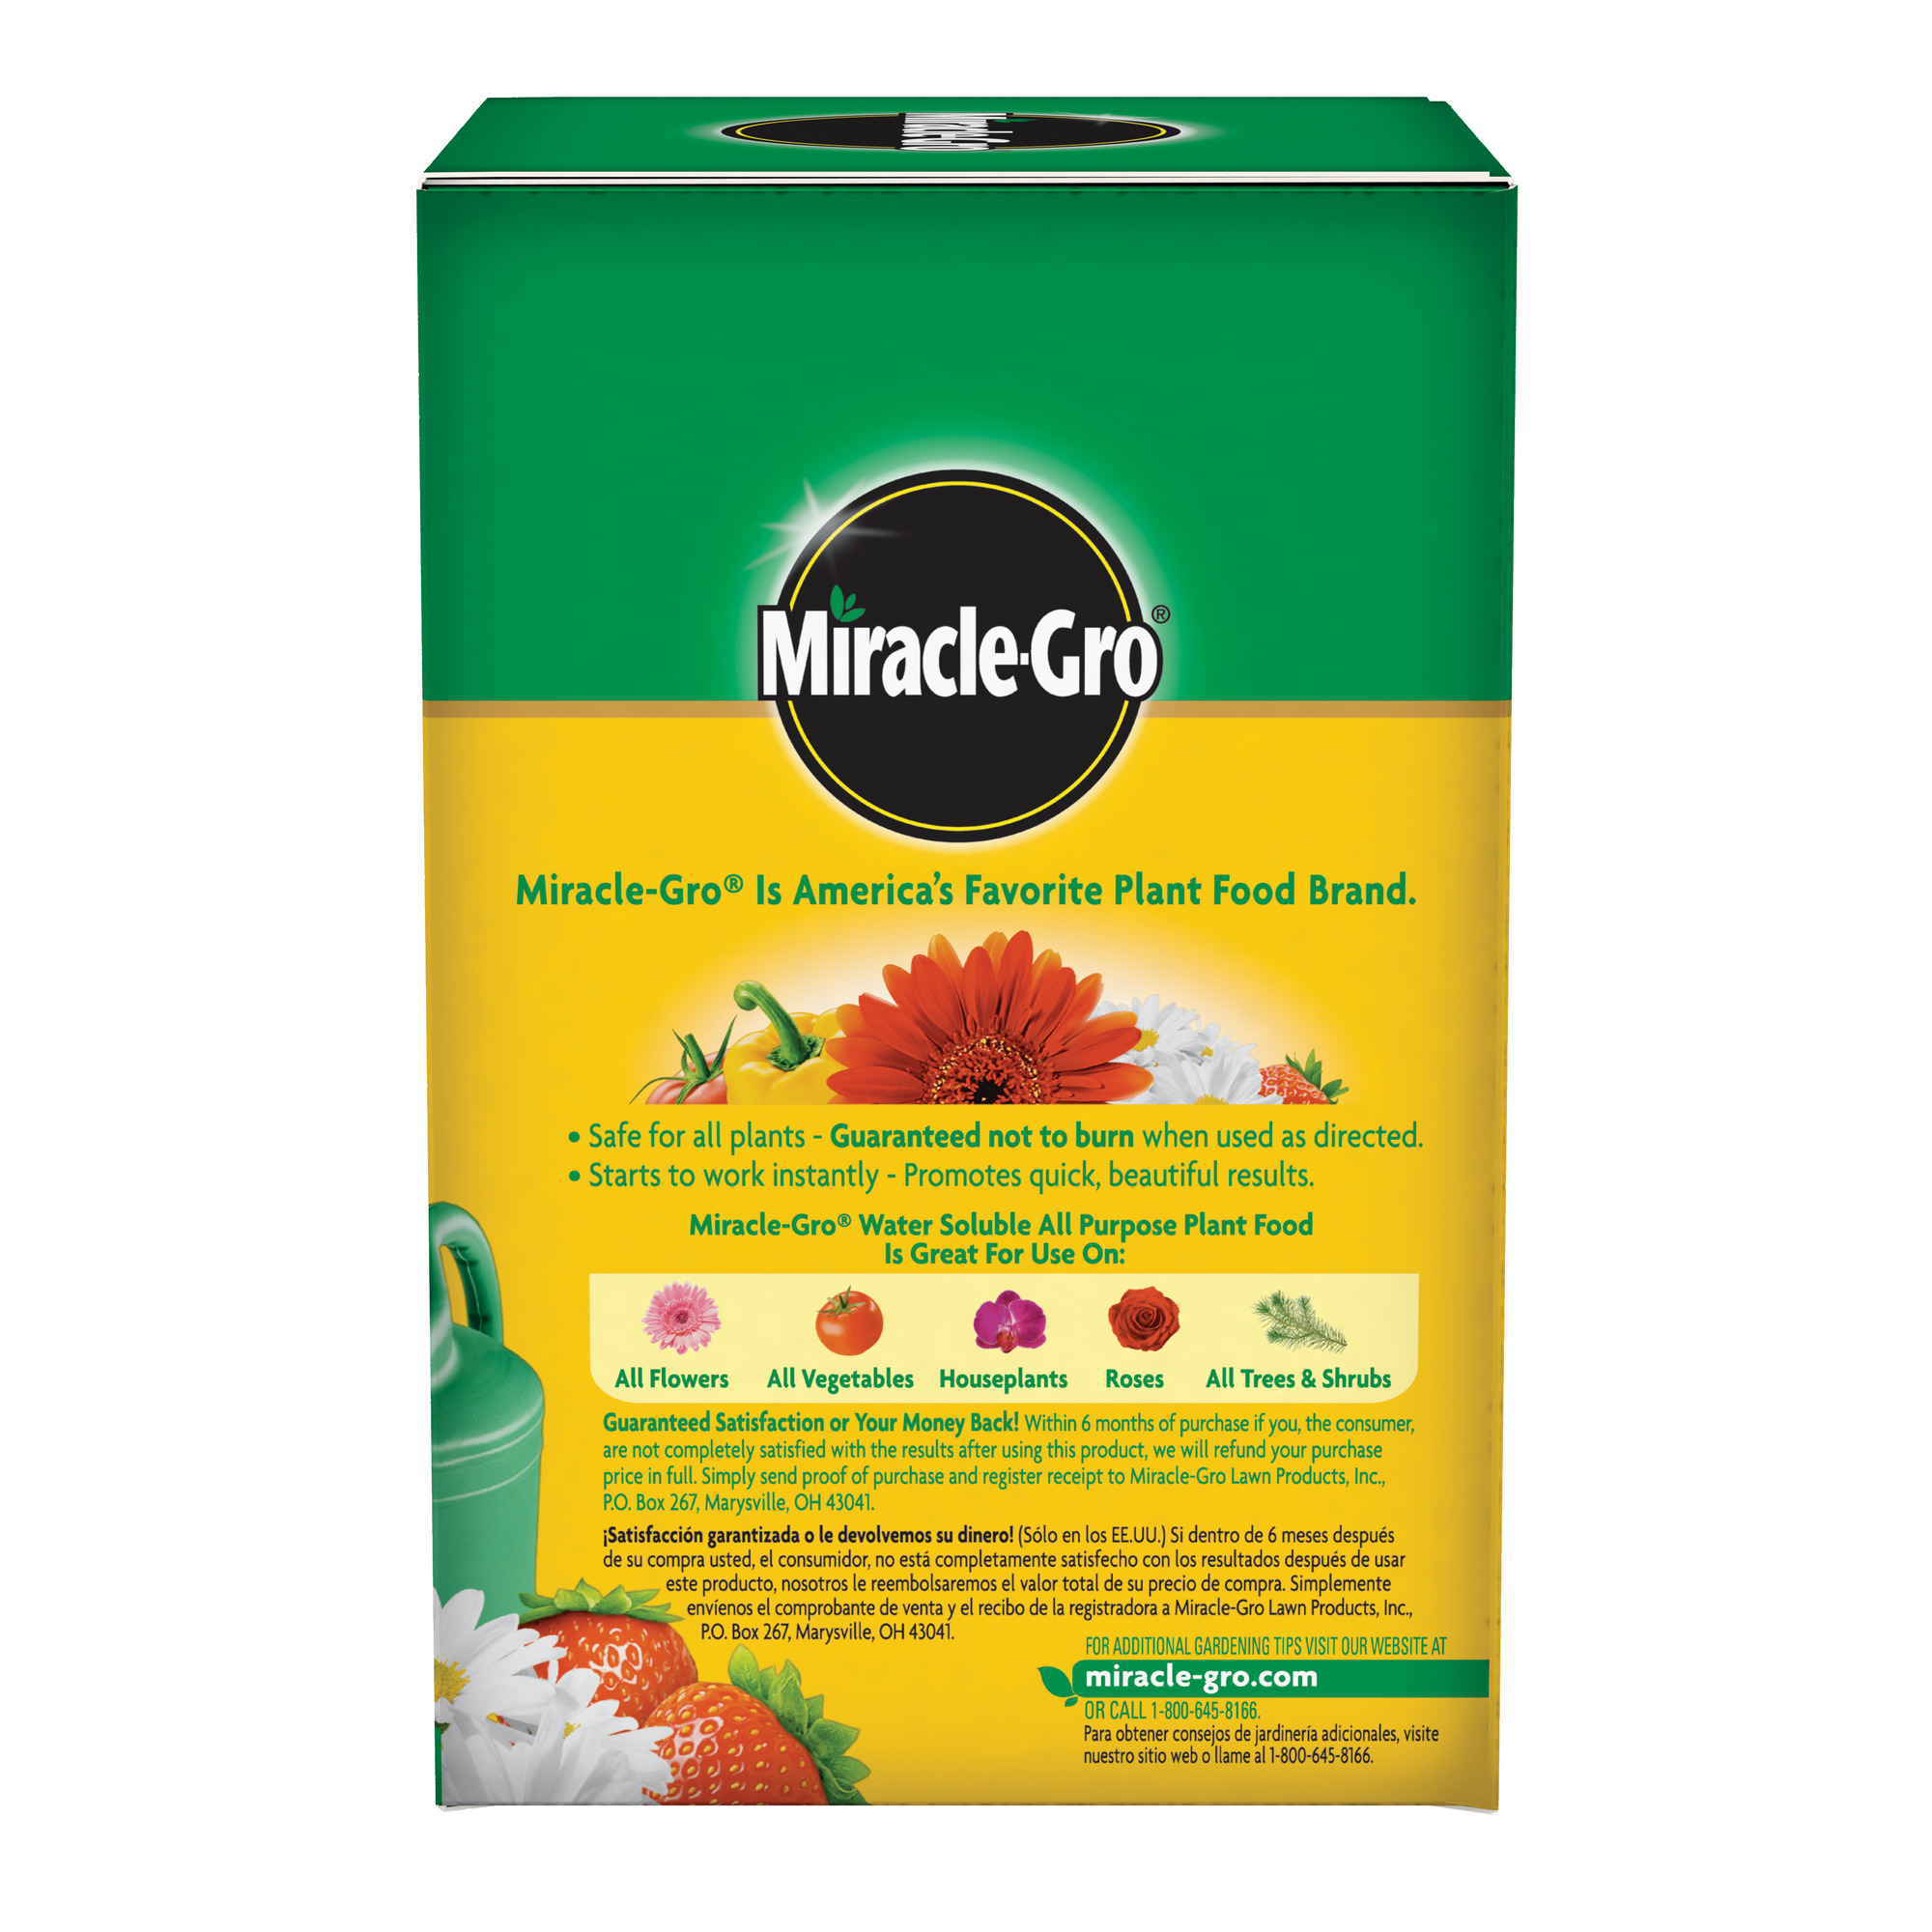 Miracle-Gro Water Soluble All Purpose Plant Food, 1.5 lbs., Safe for All Plants - image 4 of 16